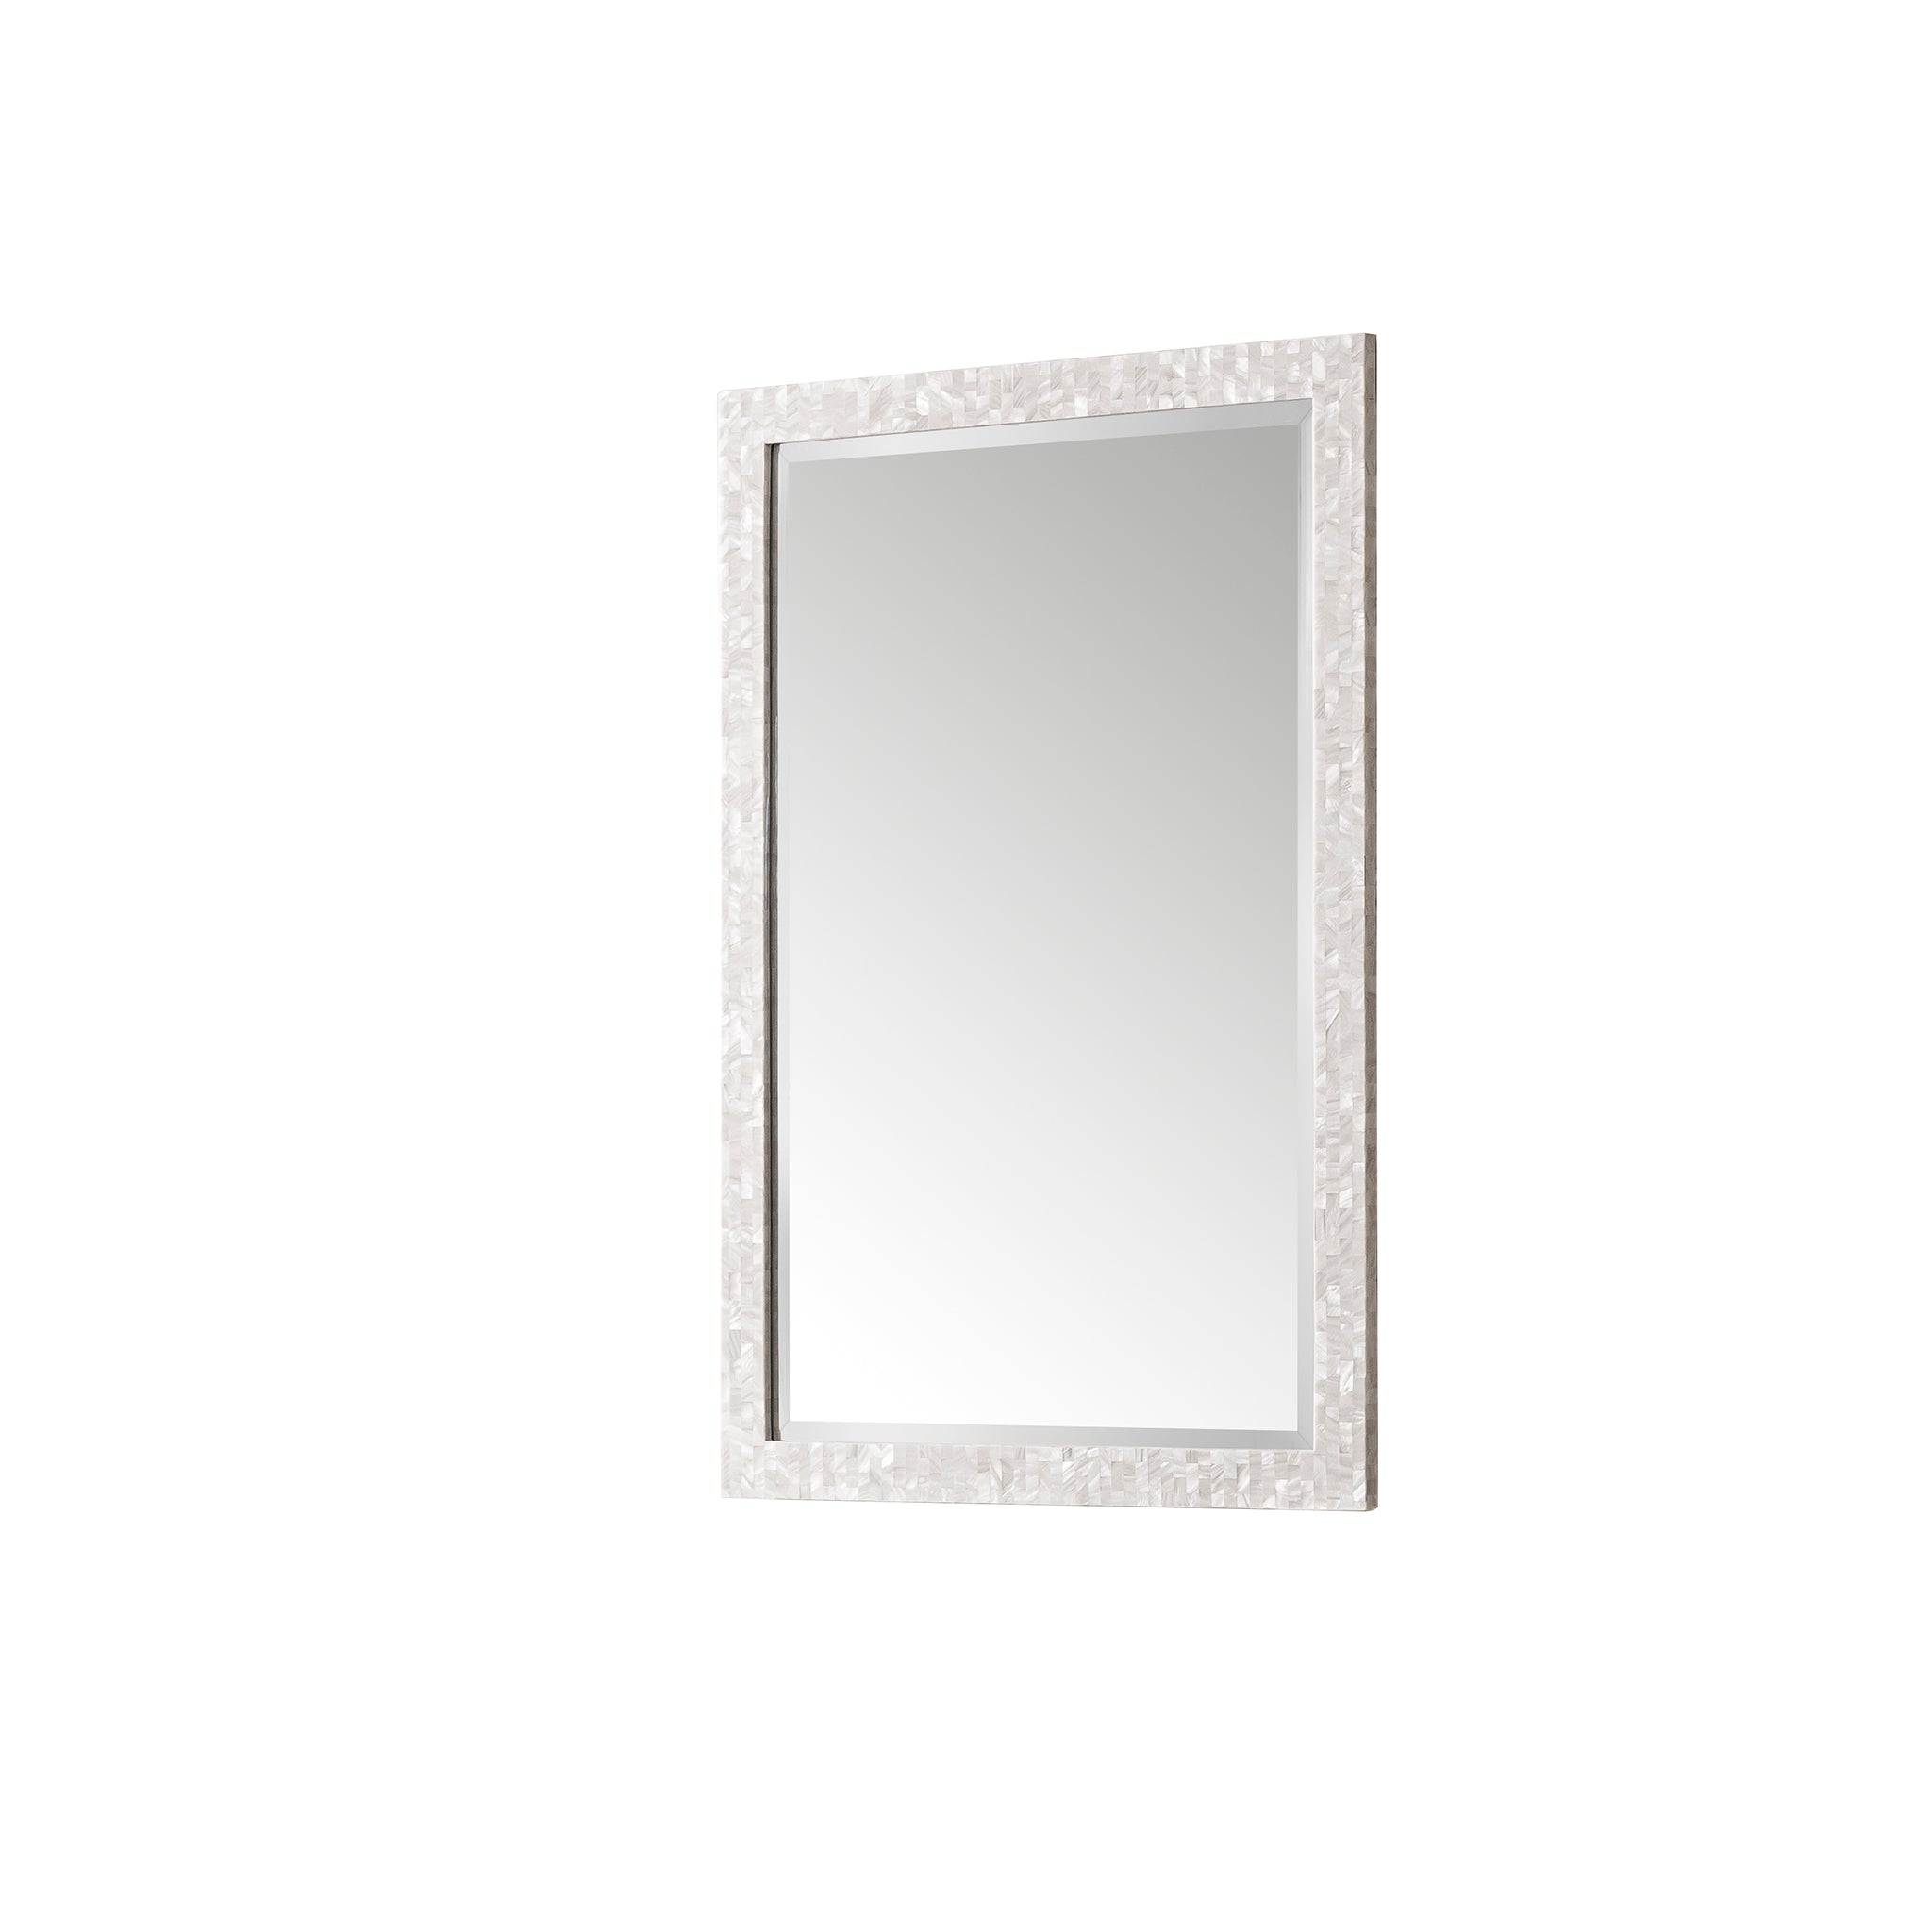 white mother of pearl Mirror